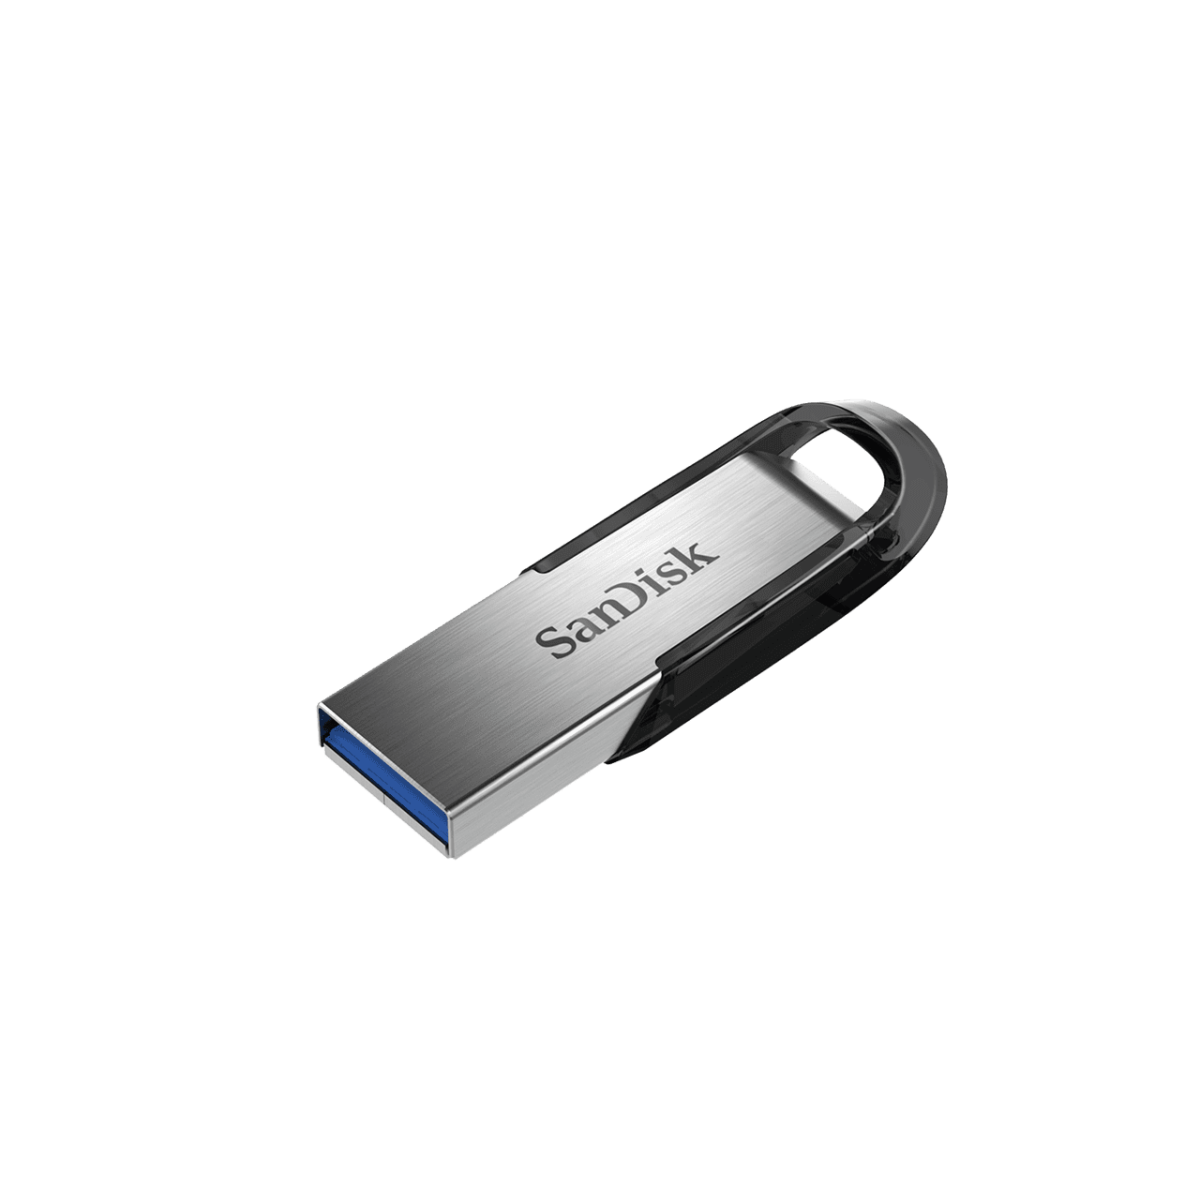 Ultra Flair Usb 3 0 Right 2.Png.thumb .1280.1280 Sandisk &Amp;Lt;Div Class=&Amp;Quot;Inheritpara Mb-4&Amp;Quot;&Amp;Gt; The Sandisk Ultra Flair™ Usb 3.0 Flash Drive Moves Your Files Fast. Spend Less Time Waiting To Transfer Files And Enjoy High-Speed Usb 3.0 Performance Of Up To 150Mb/S&Amp;Lt;A Class=&Amp;Quot;Disclosure&Amp;Quot; Tabindex=&Amp;Quot;0&Amp;Quot; Href=&Amp;Quot;Https://Shop.westerndigital.com/Products/Usb-Flash-Drives/Sandisk-Ultra-Flair-Usb-3-0#Disclosures&Amp;Quot; Target=&Amp;Quot;_Self&Amp;Quot; Rel=&Amp;Quot;Noopener Noreferrer&Amp;Quot; Aria-Labelledby=&Amp;Quot;Disclosures&Amp;Quot;&Amp;Gt;&Amp;Lt;Sup&Amp;Gt;**&Amp;Lt;/Sup&Amp;Gt;&Amp;Lt;/A&Amp;Gt;. Its Durable And Sleek Metal Casing Is Tough Enough To Handle Knocks With Style. And, With Password Protection, You Can Rest Assured That Your Private Files Stay Private&Amp;Lt;A Class=&Amp;Quot;Disclosure&Amp;Quot; Tabindex=&Amp;Quot;0&Amp;Quot; Href=&Amp;Quot;Https://Shop.westerndigital.com/Products/Usb-Flash-Drives/Sandisk-Ultra-Flair-Usb-3-0#Disclosures&Amp;Quot; Target=&Amp;Quot;_Self&Amp;Quot; Rel=&Amp;Quot;Noopener Noreferrer&Amp;Quot; Aria-Labelledby=&Amp;Quot;Disclosures&Amp;Quot;&Amp;Gt;&Amp;Lt;Sup&Amp;Gt;1&Amp;Lt;/Sup&Amp;Gt;&Amp;Lt;/A&Amp;Gt;. Store Your Files In Style With The Sandisk Ultra Flair Usb 3.0 Flash Drive. &Amp;Lt;Strong&Amp;Gt;Warranty&Amp;Lt;/Strong&Amp;Gt; The Sandisk Ultra Flair Usb 3.0 Flash Drive Is Backed By A Five-Year Manufacturer Warranty&Amp;Lt;A Class=&Amp;Quot;Disclosure&Amp;Quot; Tabindex=&Amp;Quot;0&Amp;Quot; Href=&Amp;Quot;Https://Shop.westerndigital.com/Products/Usb-Flash-Drives/Sandisk-Ultra-Flair-Usb-3-0#Disclosures&Amp;Quot; Target=&Amp;Quot;_Self&Amp;Quot; Rel=&Amp;Quot;Noopener Noreferrer&Amp;Quot; Aria-Labelledby=&Amp;Quot;Disclosures&Amp;Quot;&Amp;Gt;&Amp;Lt;Sup&Amp;Gt;2&Amp;Lt;/Sup&Amp;Gt;&Amp;Lt;/A&Amp;Gt; &Amp;Lt;/Div&Amp;Gt; Sandisk Ultra Flair Usb 3.0 Flash Drive (64Gb)